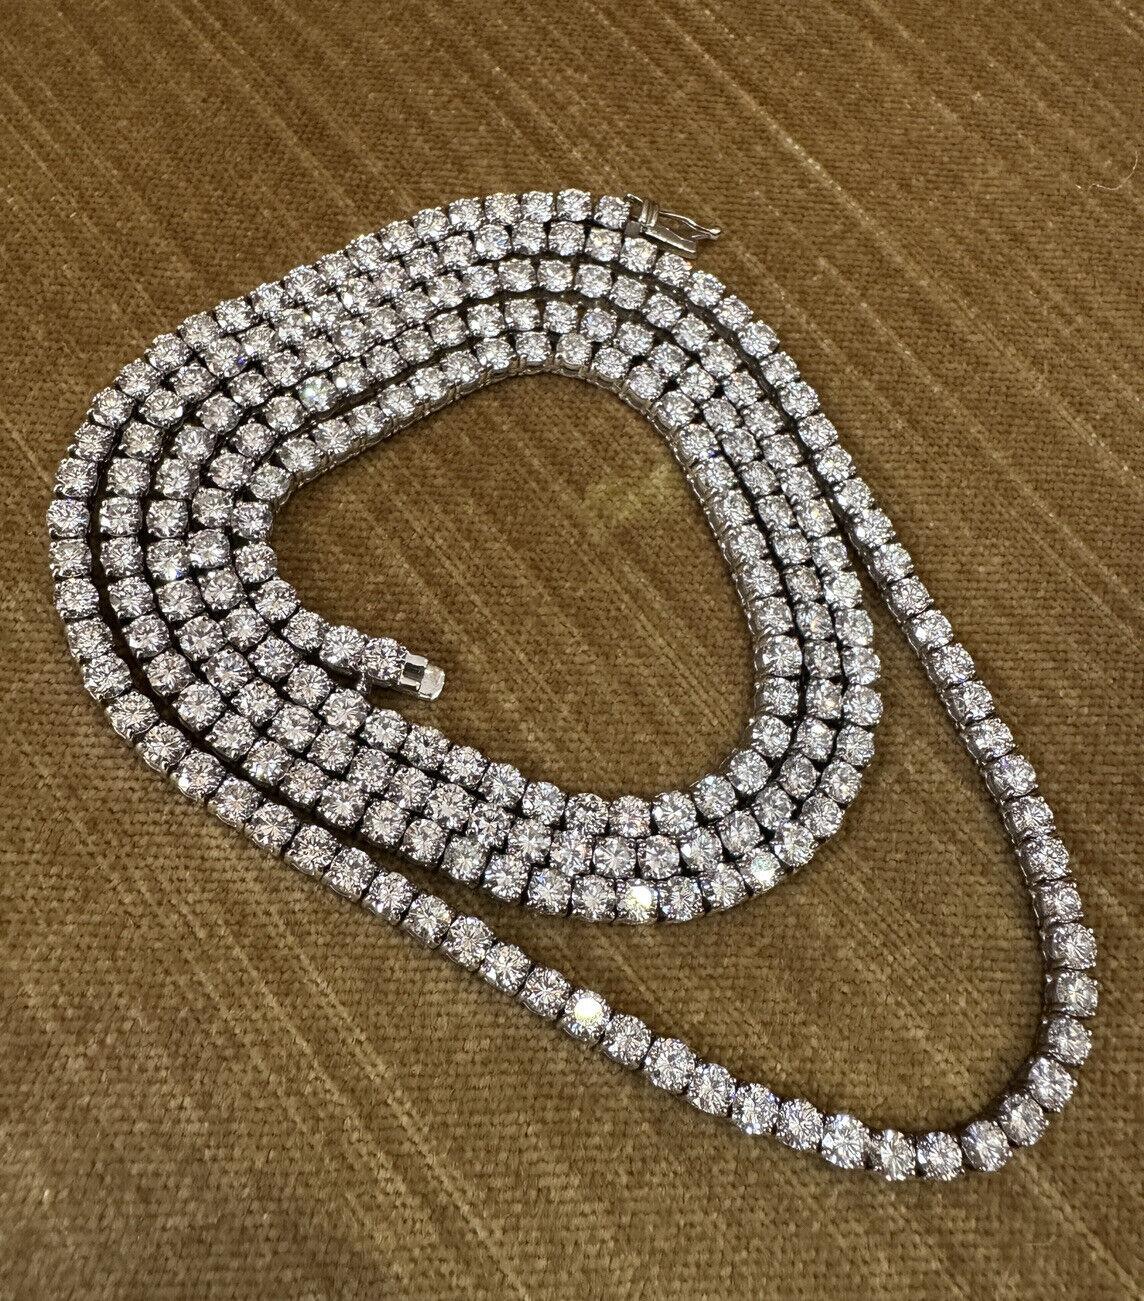 Long Luxurious Diamond In-line Riviera Necklace features 
229 Round Brilliant Cut Diamonds set in four-prong setting.
Necklace is 18k White Gold with a Total Weight of 32.96 carats.
Necklace is 31.5 inches long and weighs 44.6 grams.
Hallmarks: 750,